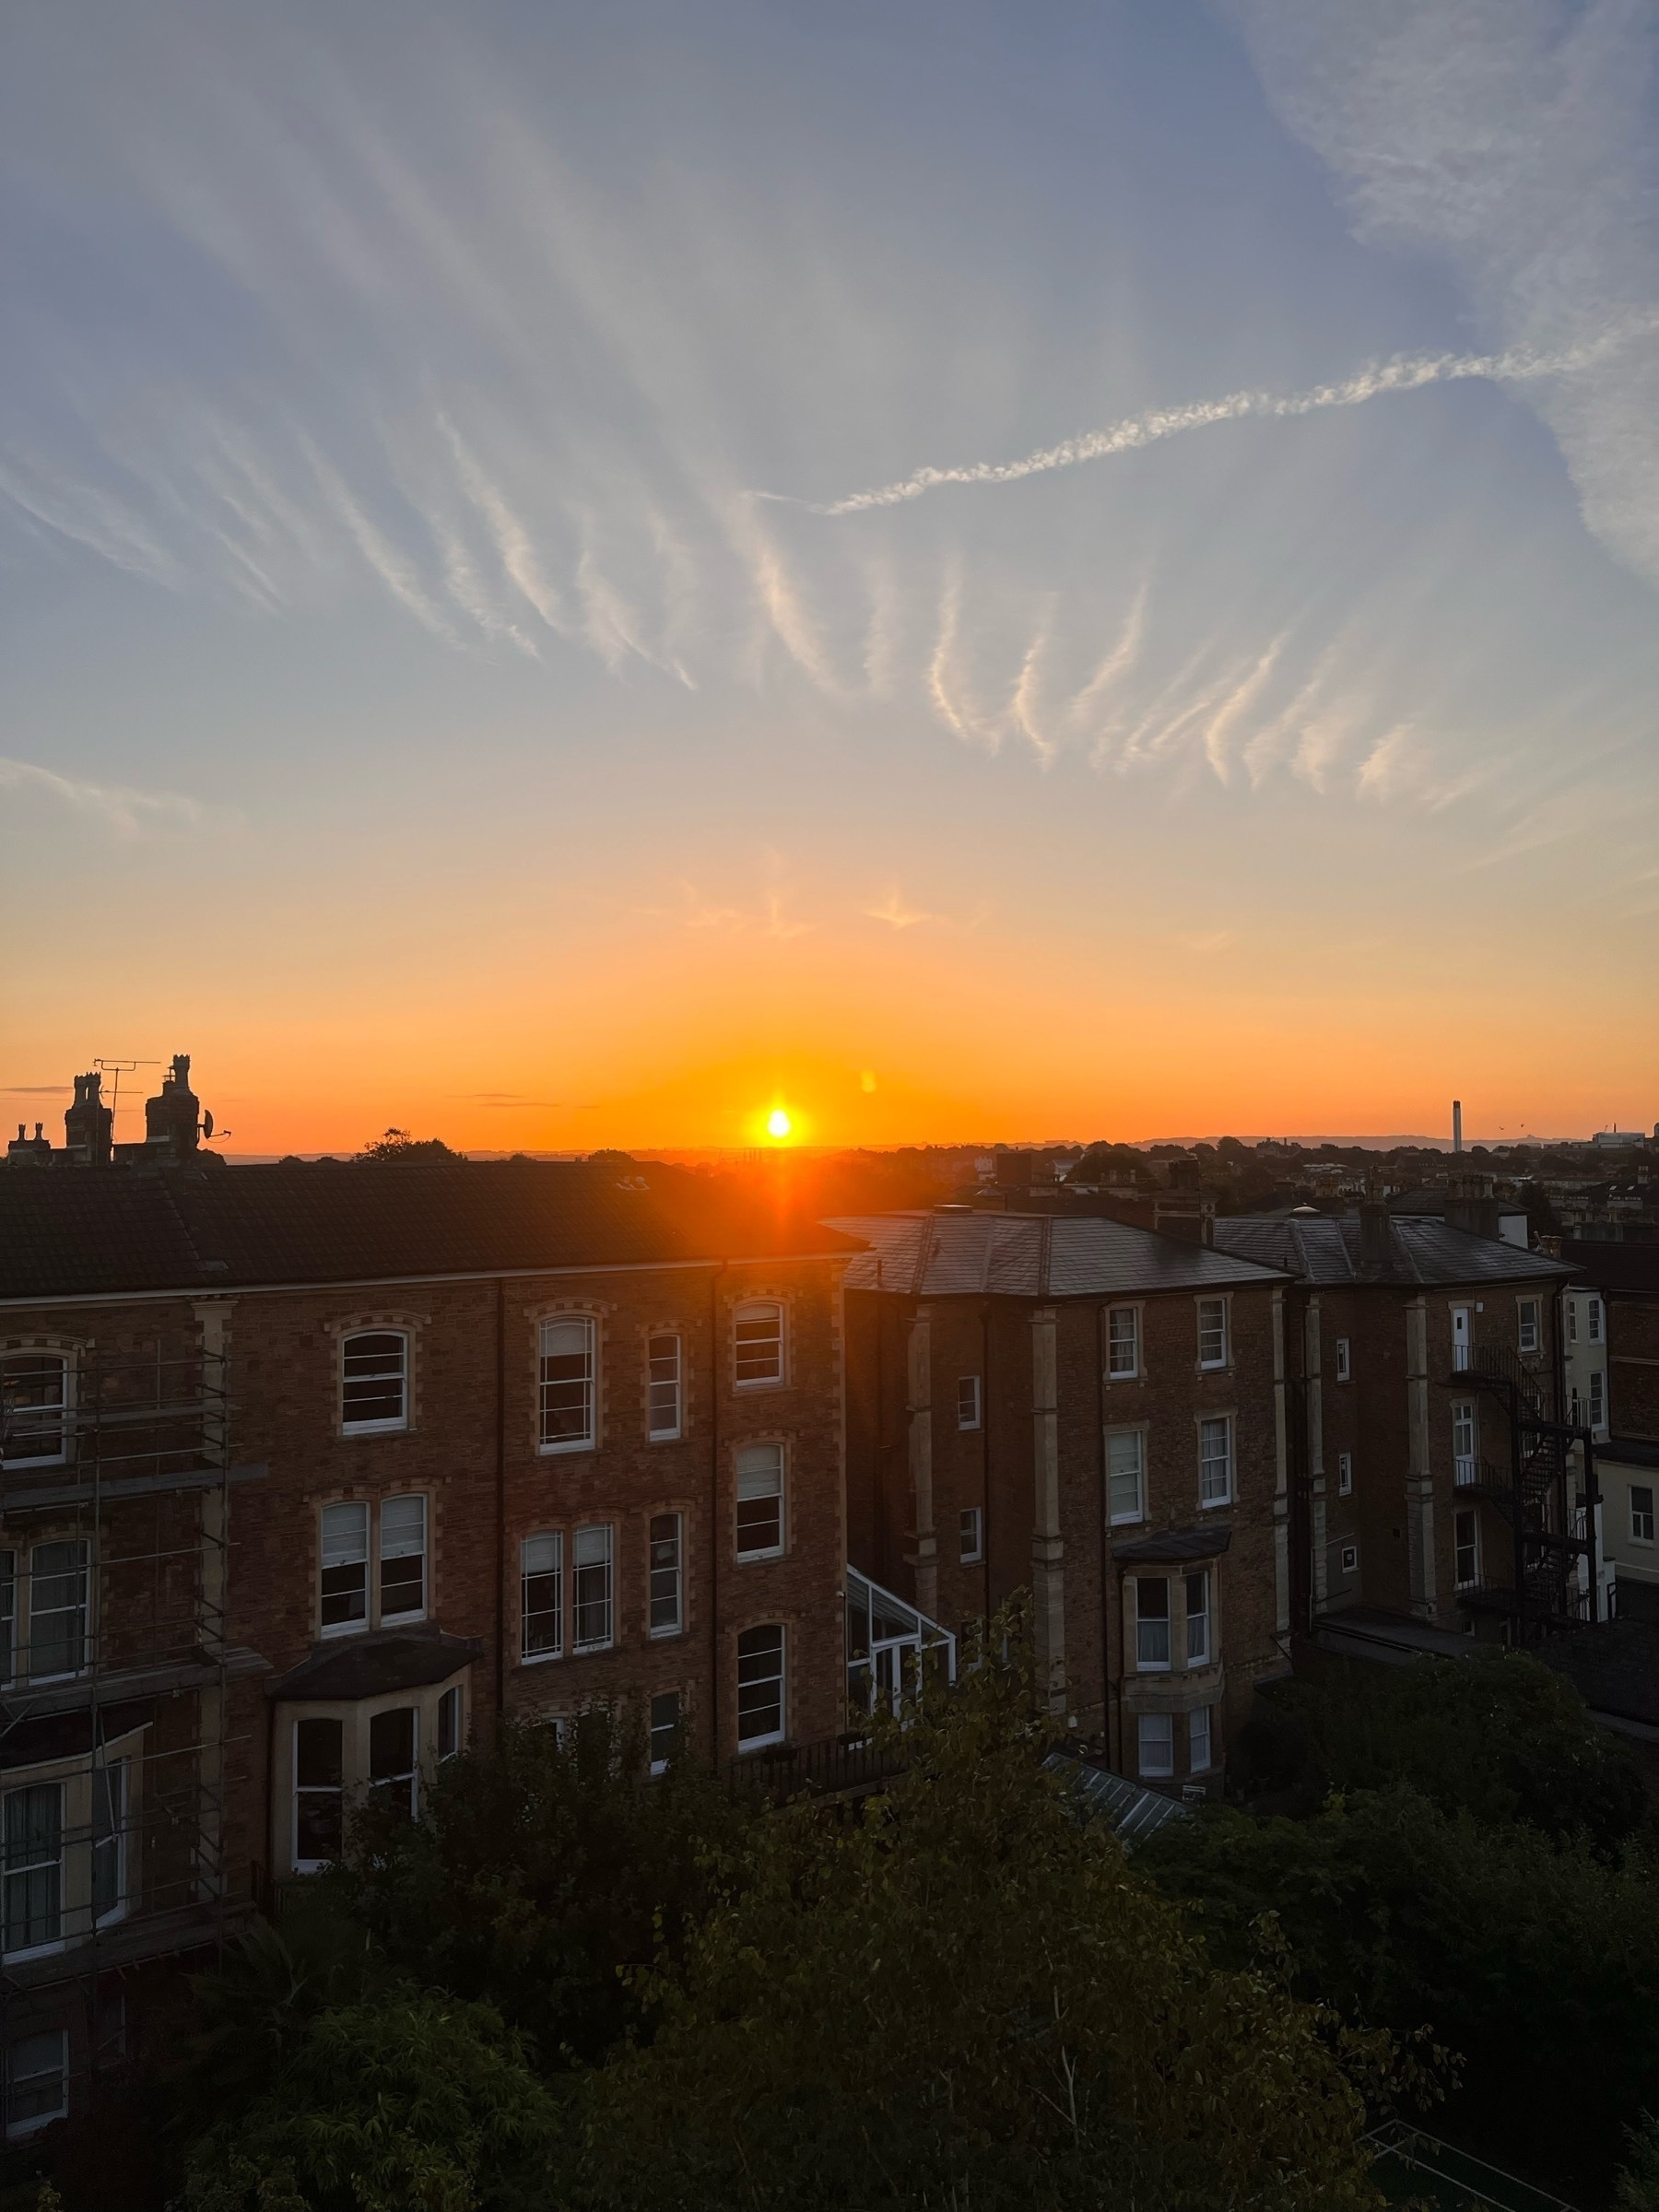 Sunrise over Bristol, England with wispy cloud formation